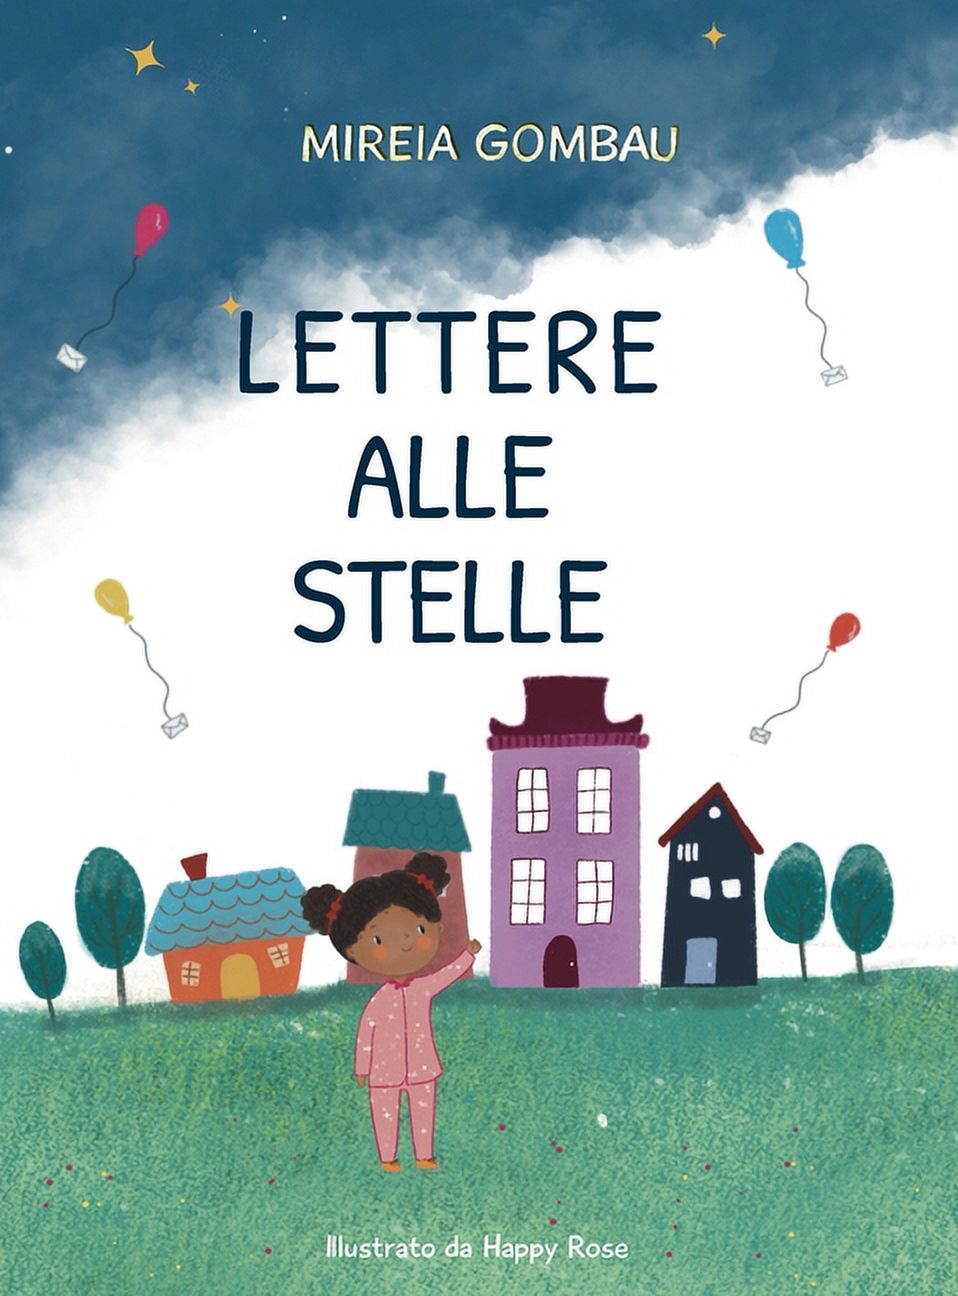 Children's Picture Books: Emotions, Feelings, Values and Social Habilities (Teaching Emotional Intel: Lettere alle stelle (Hardcover) - image 1 of 1